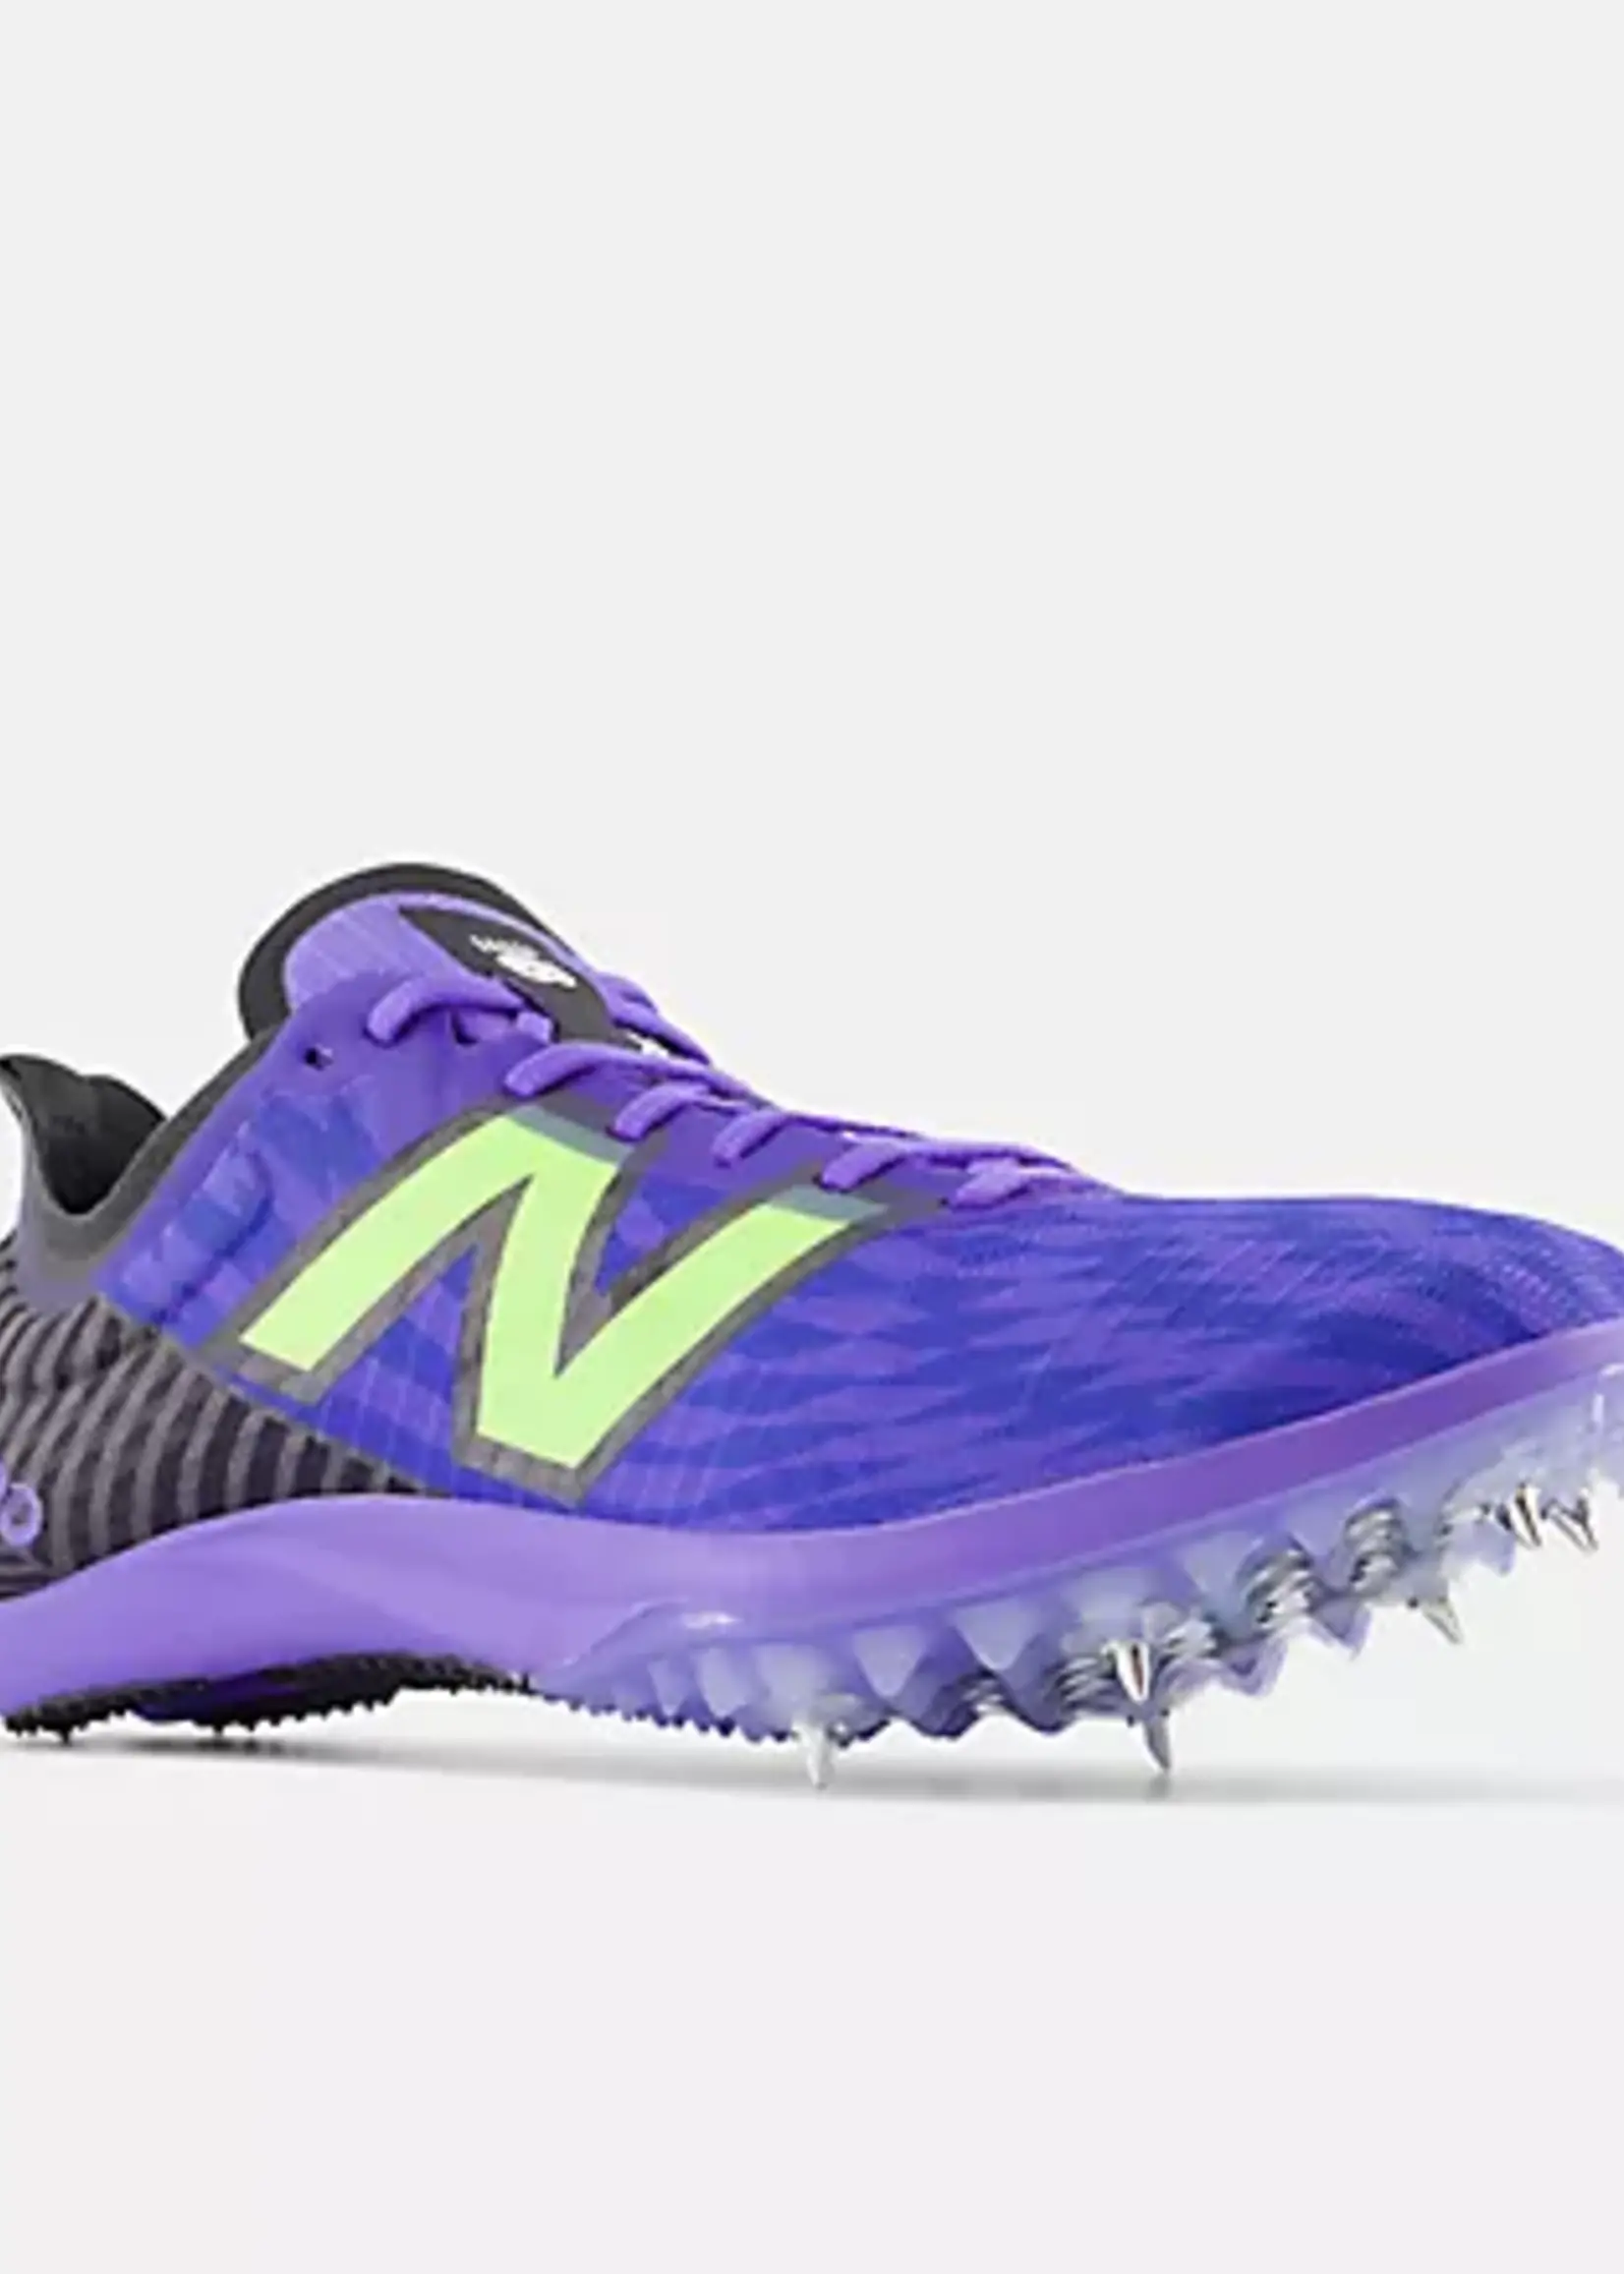 NEW BALANCE WOMEN'S FUELCELL MD500 V9